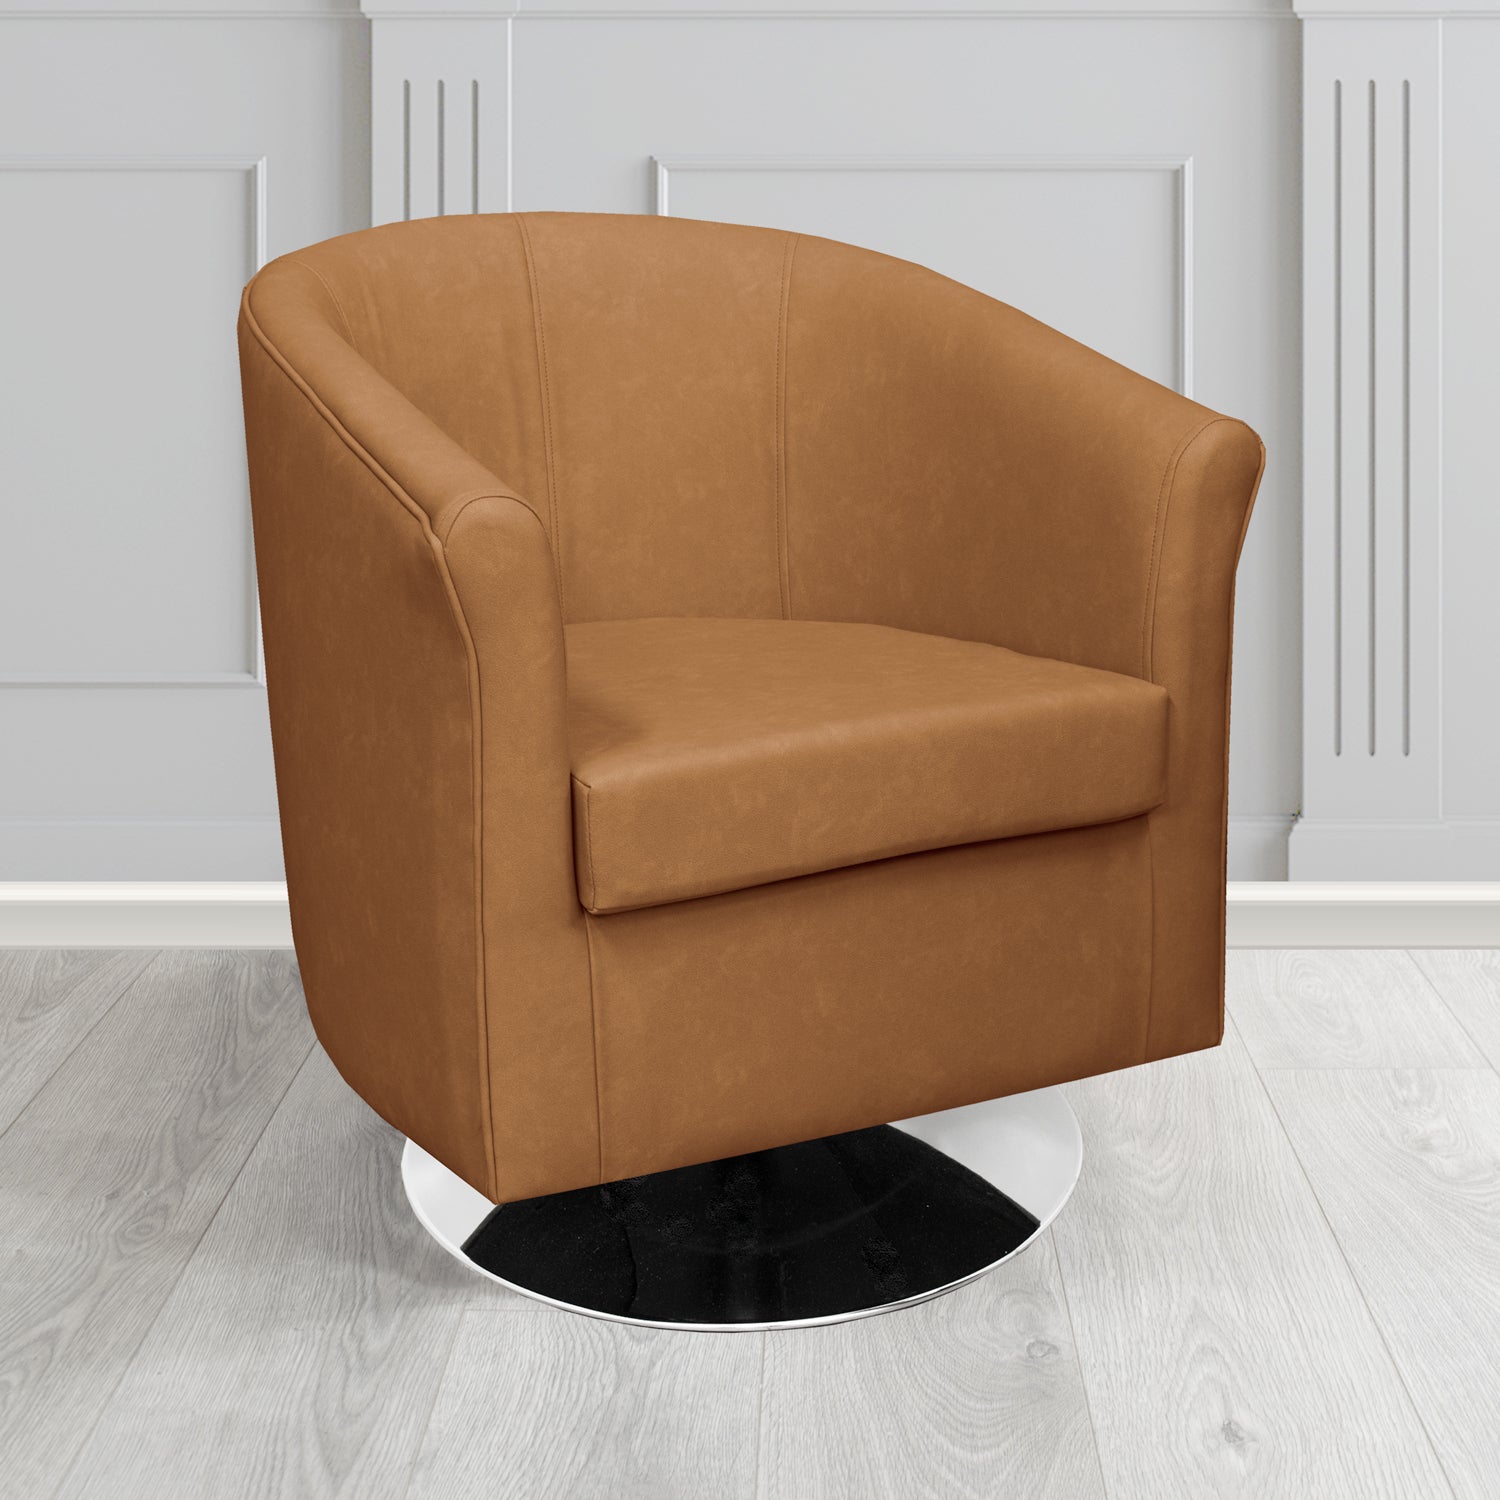 Tuscany Swivel Tub Chair in Infiniti Camel INF1849 Antimicrobial Crib 5 Faux Leather - The Tub Chair Shop